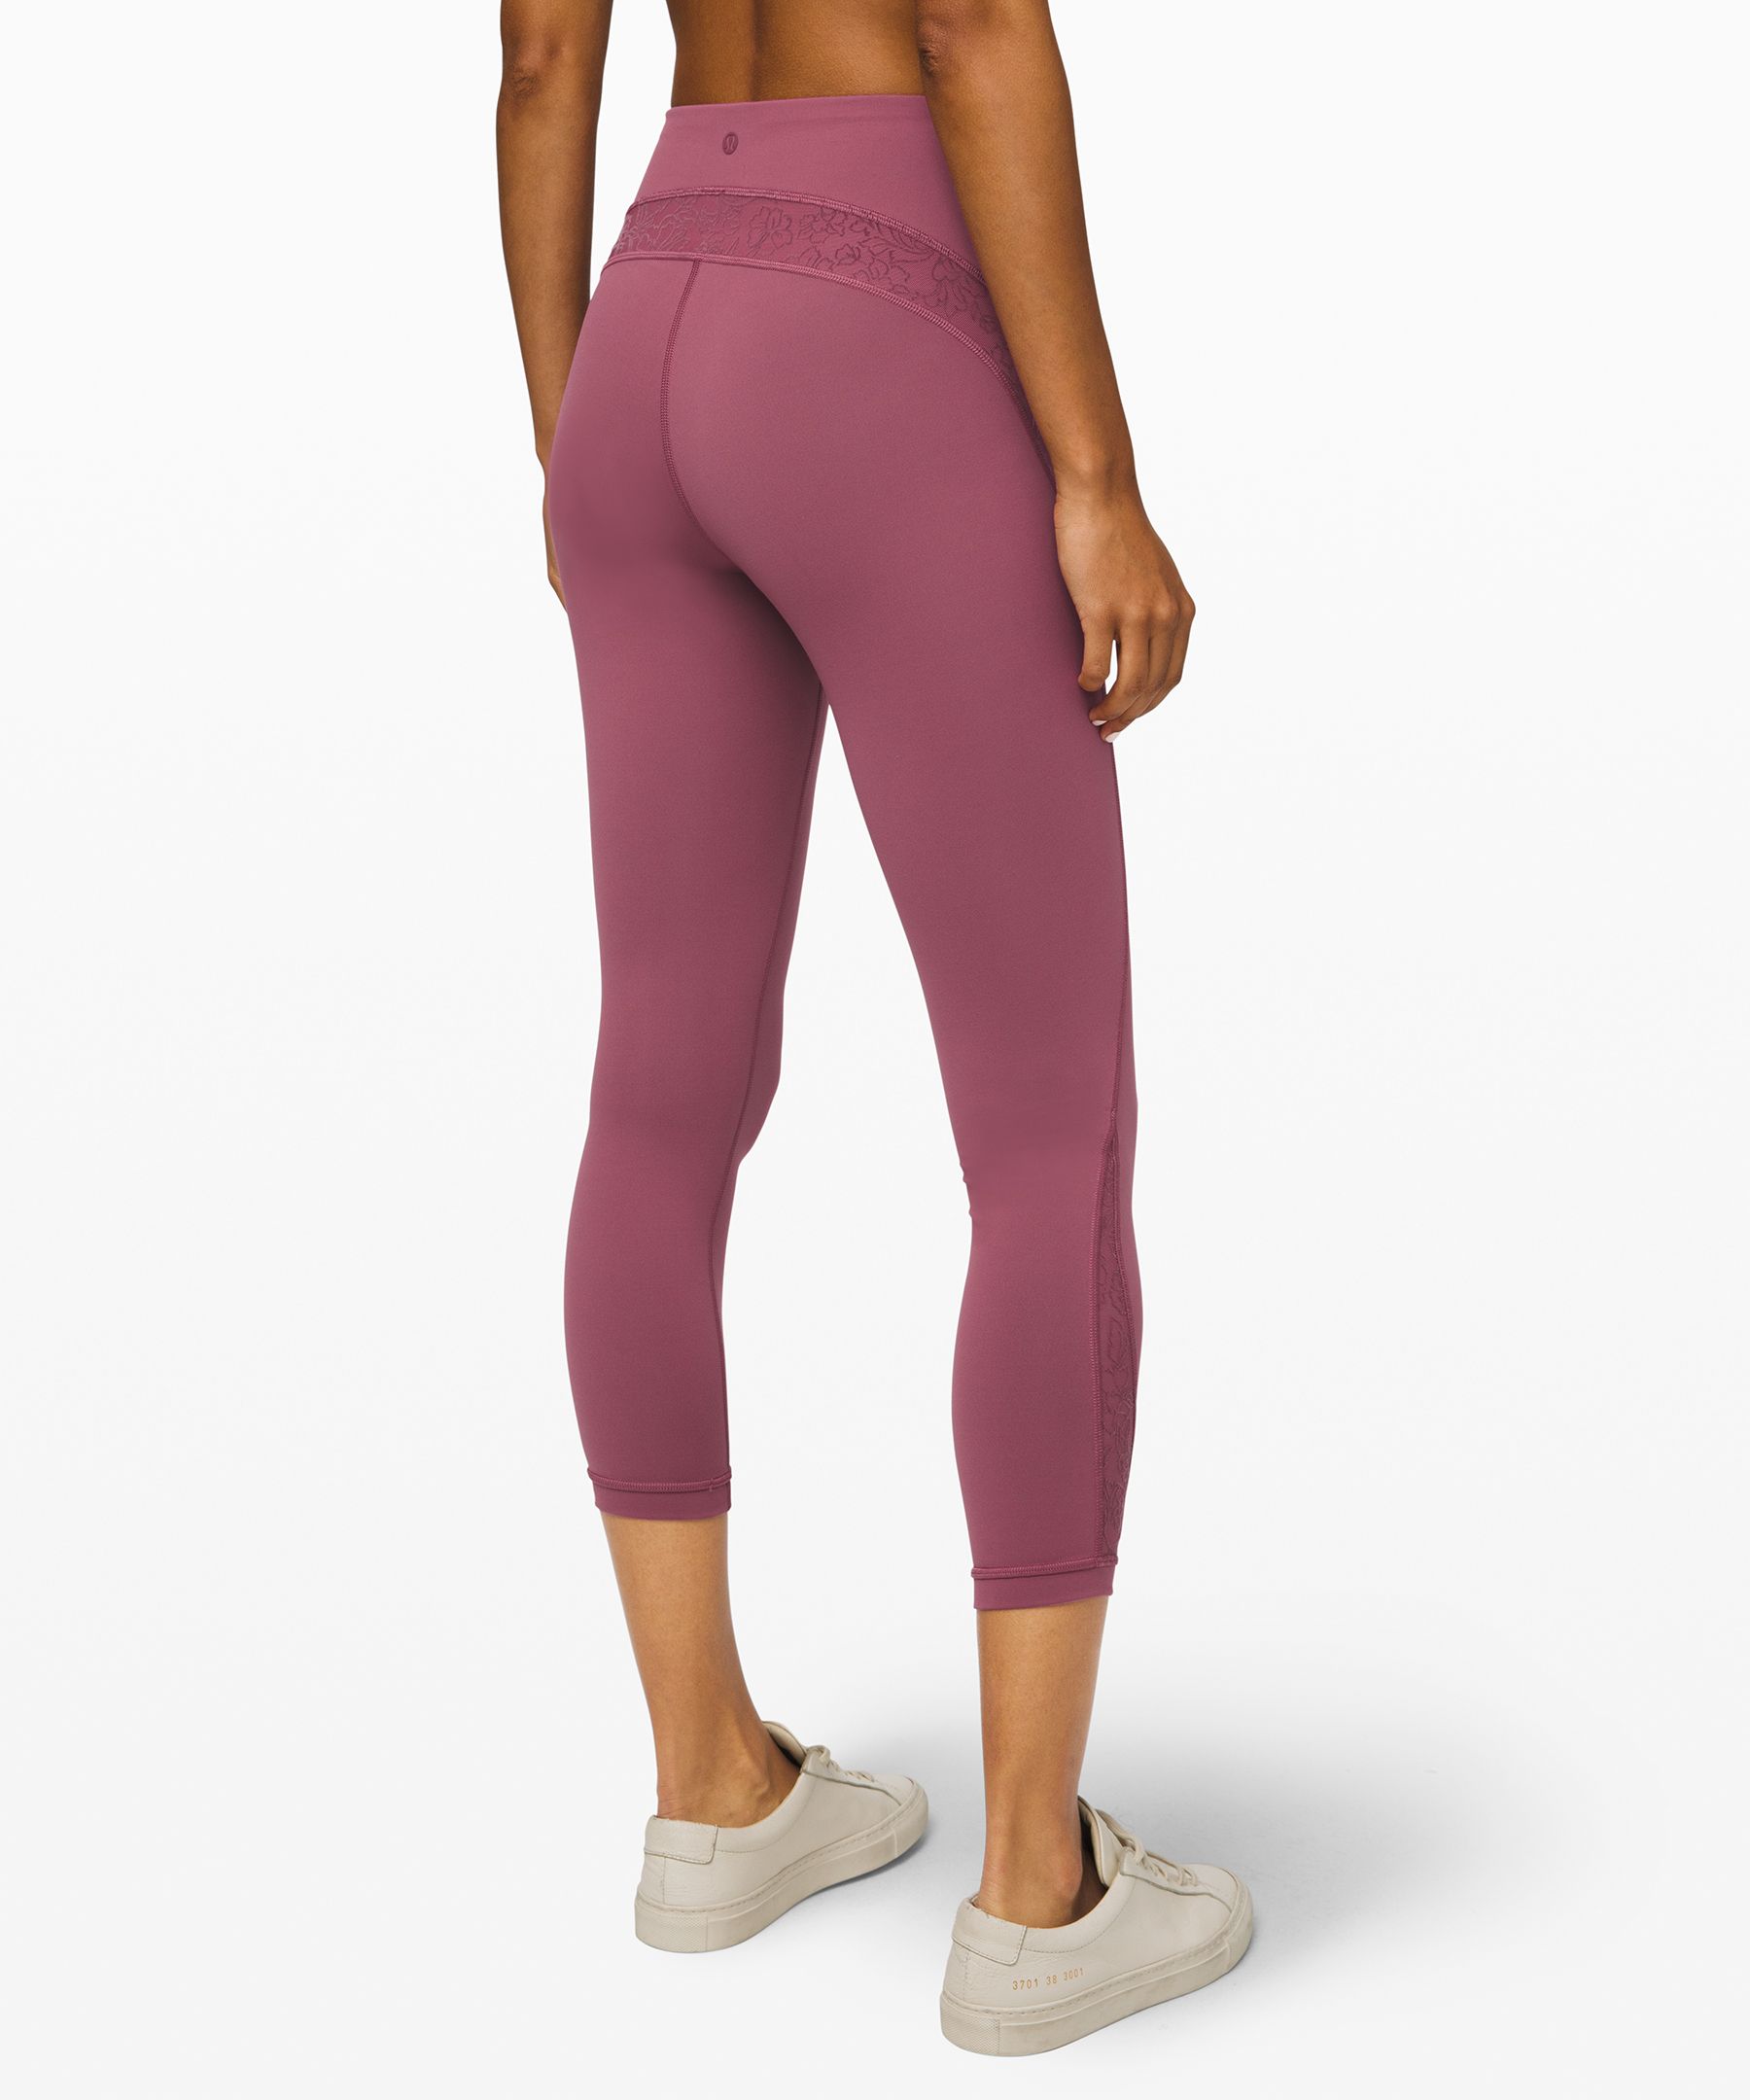 NWT---WHOLESALE LULULEMON WUNDER UNDER CROP,Discounted Lulu Candy Colors  Crops/Yoga Capris/Legging for Women,Free Shi…